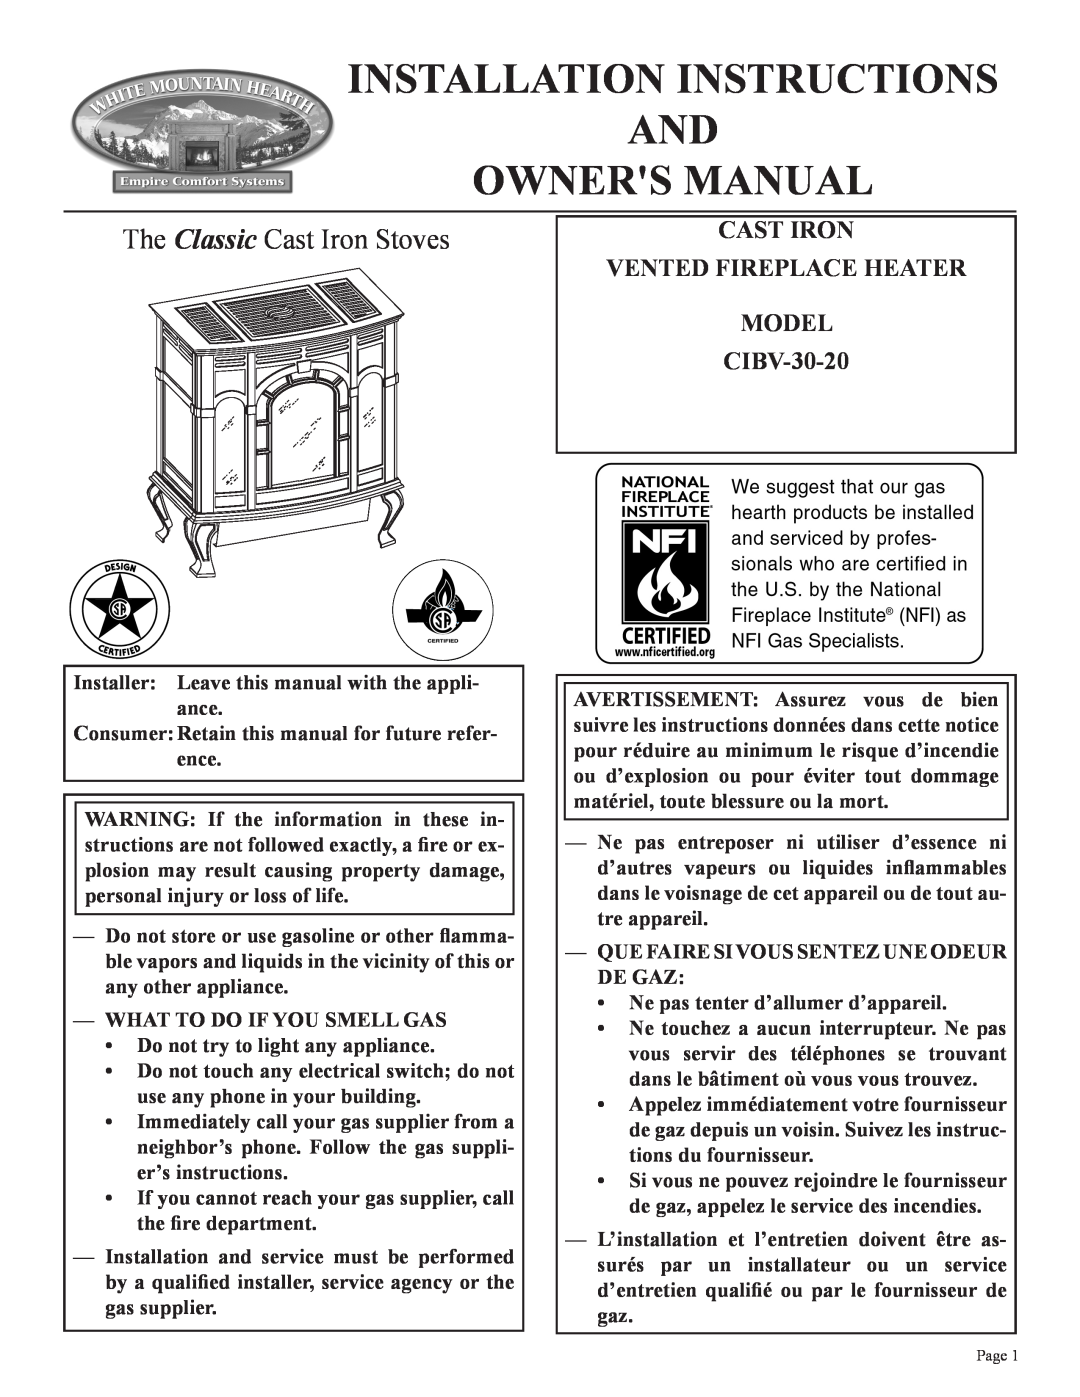 Empire Comfort Systems installation instructions CAST IRON VENTED FIREPLACE HEATER MODEL CIBV-30-20 